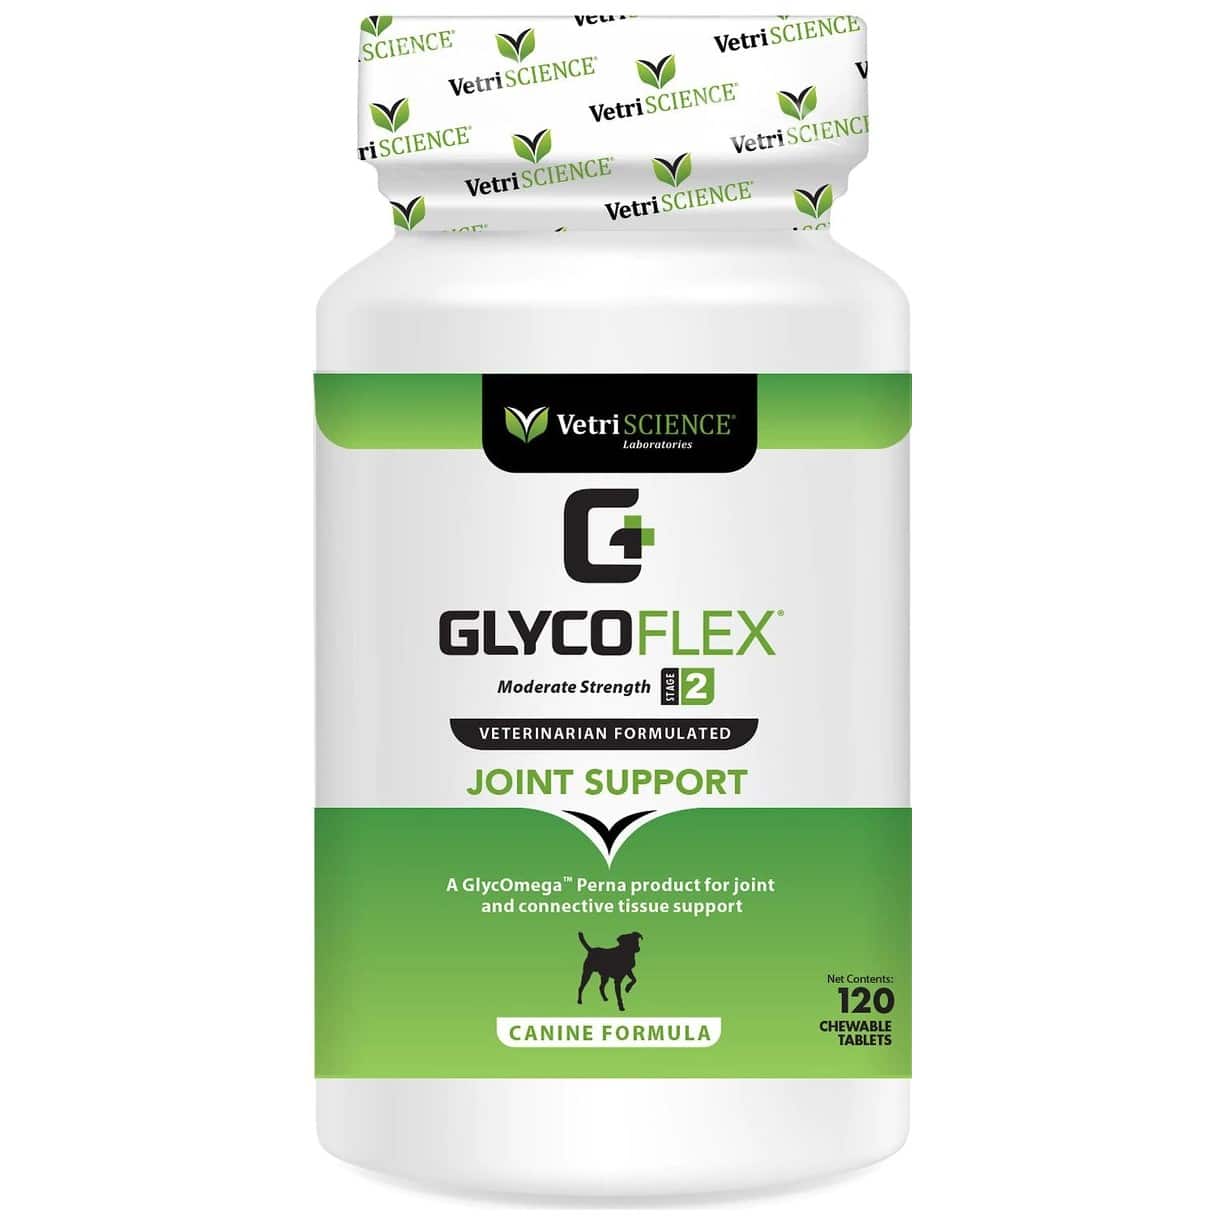 VetriScience GlycoFlex Stage 2 Chicken Flavored Chewable Tablets Joint Supplement for Dogs